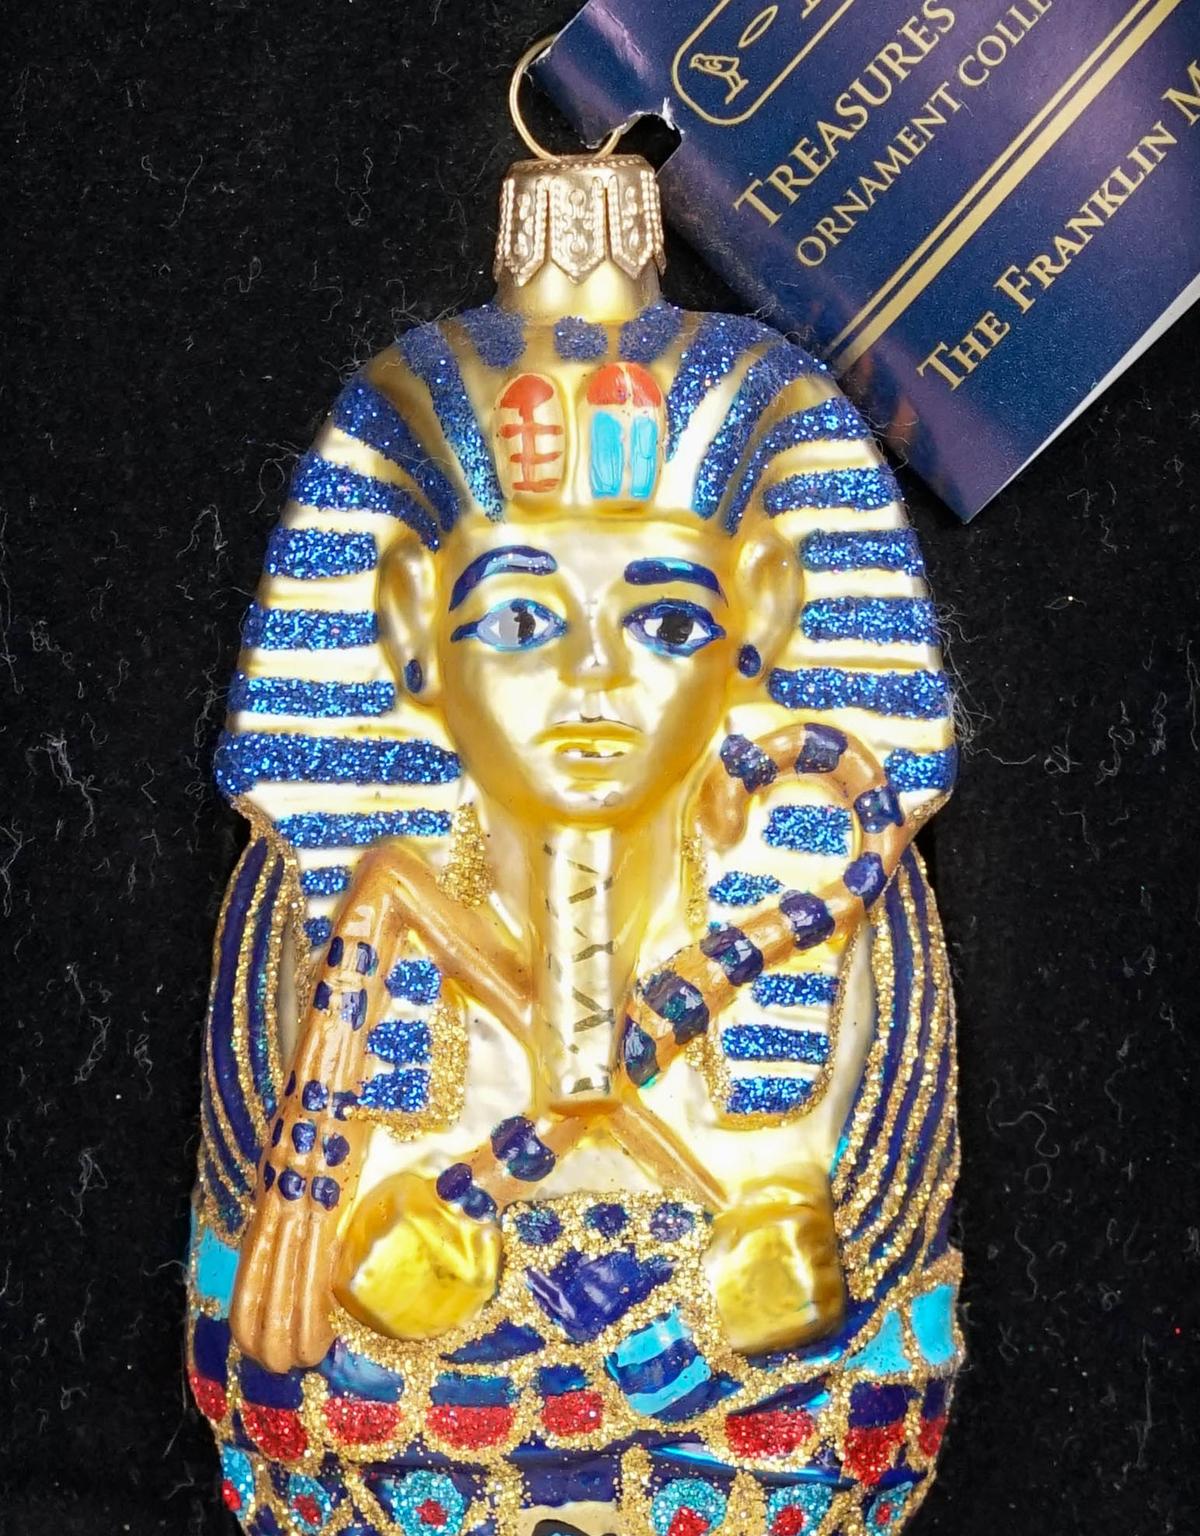 Sarcophagus - Treasures of Tut Ornament Collection - Franklin Mint